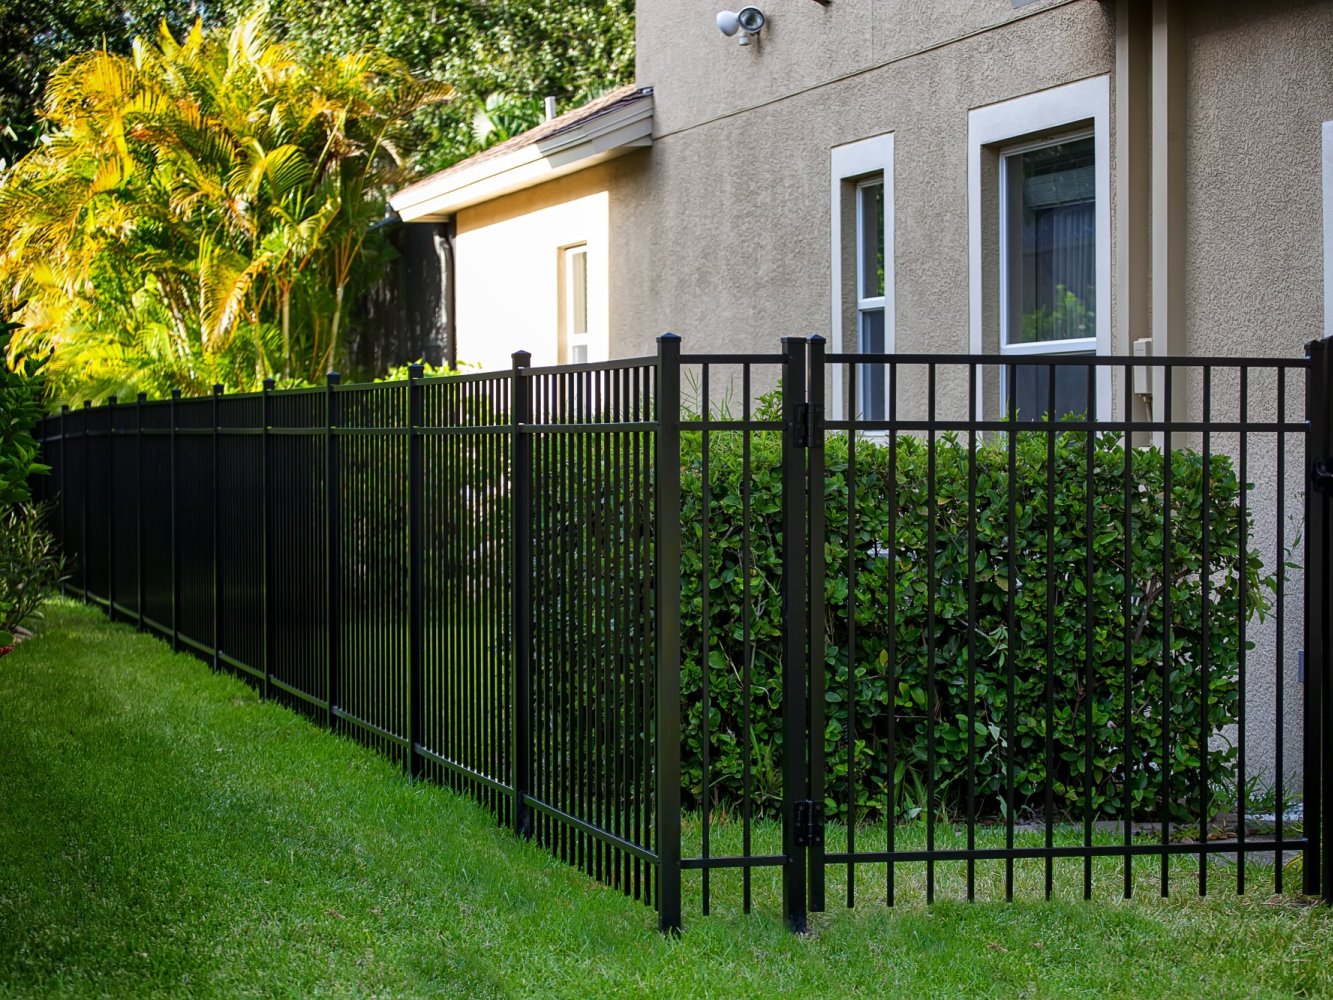 The Lonnie & Co. Fencing Difference in Keller Texas Fence Installations